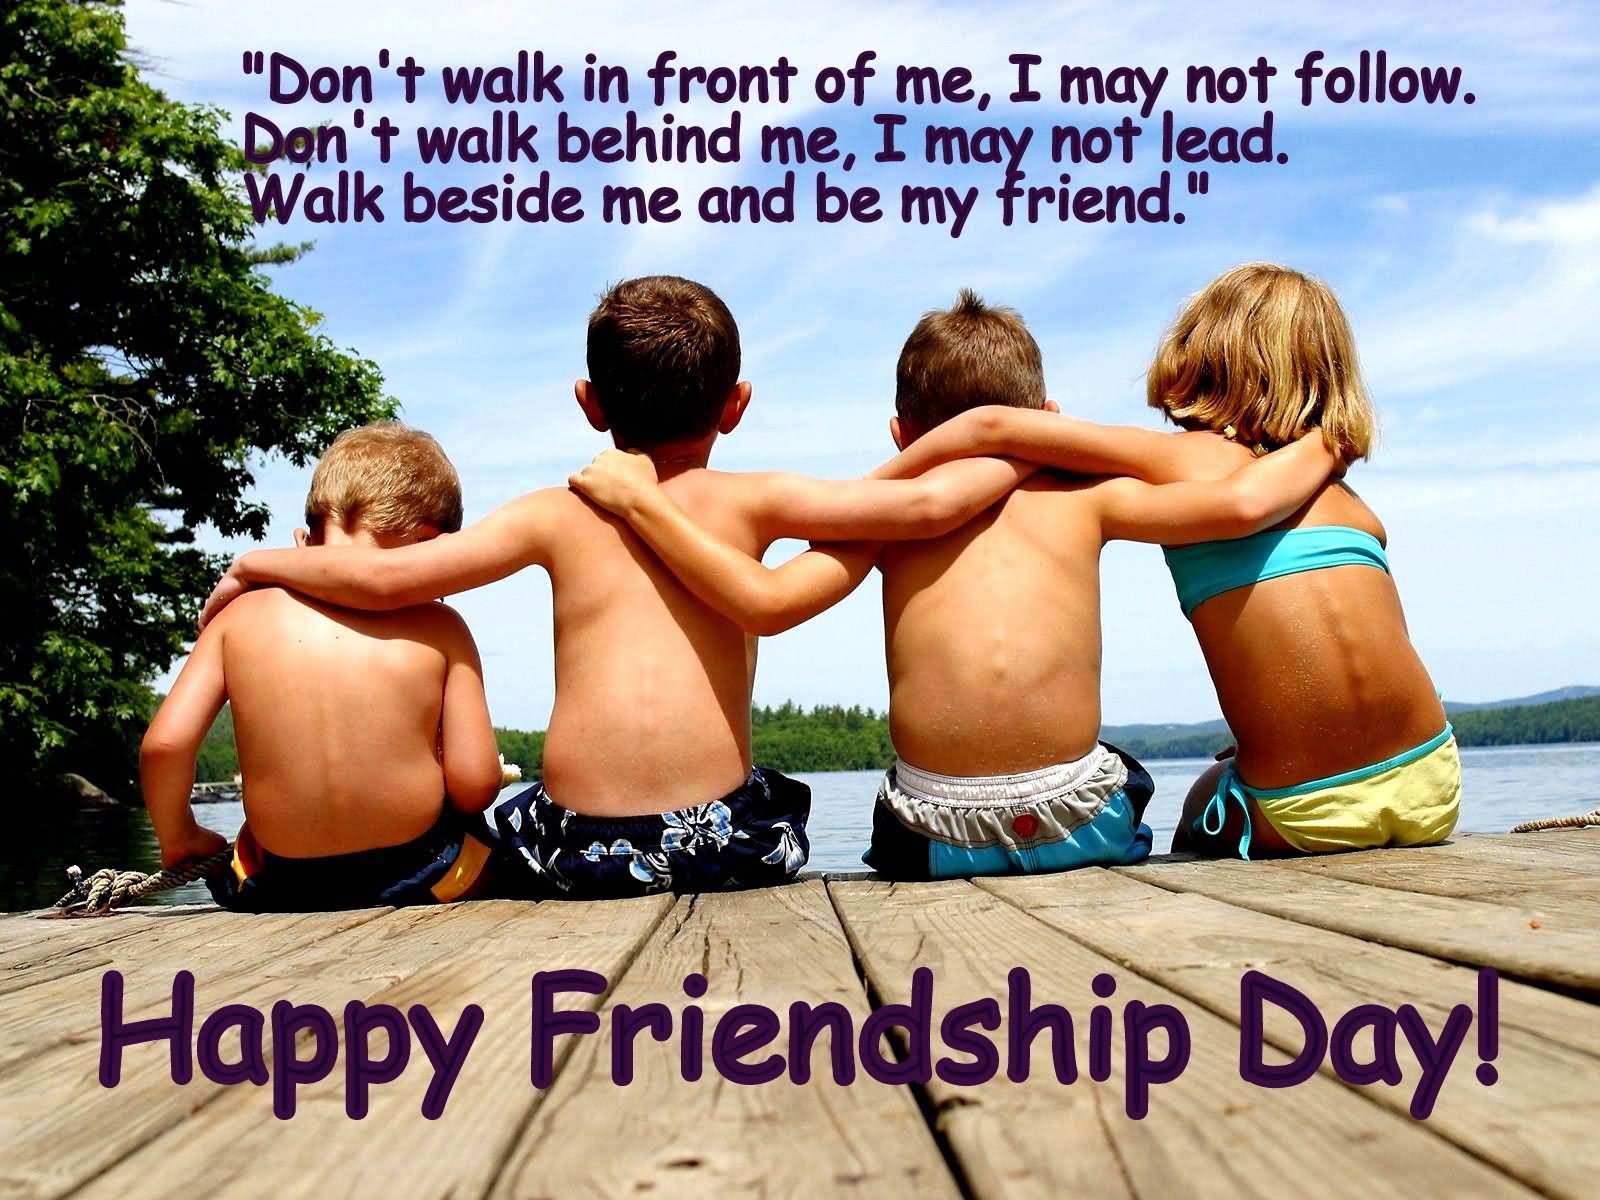 Don't Walk In Front Of Me, I May Not Follow Happy Friendship Day